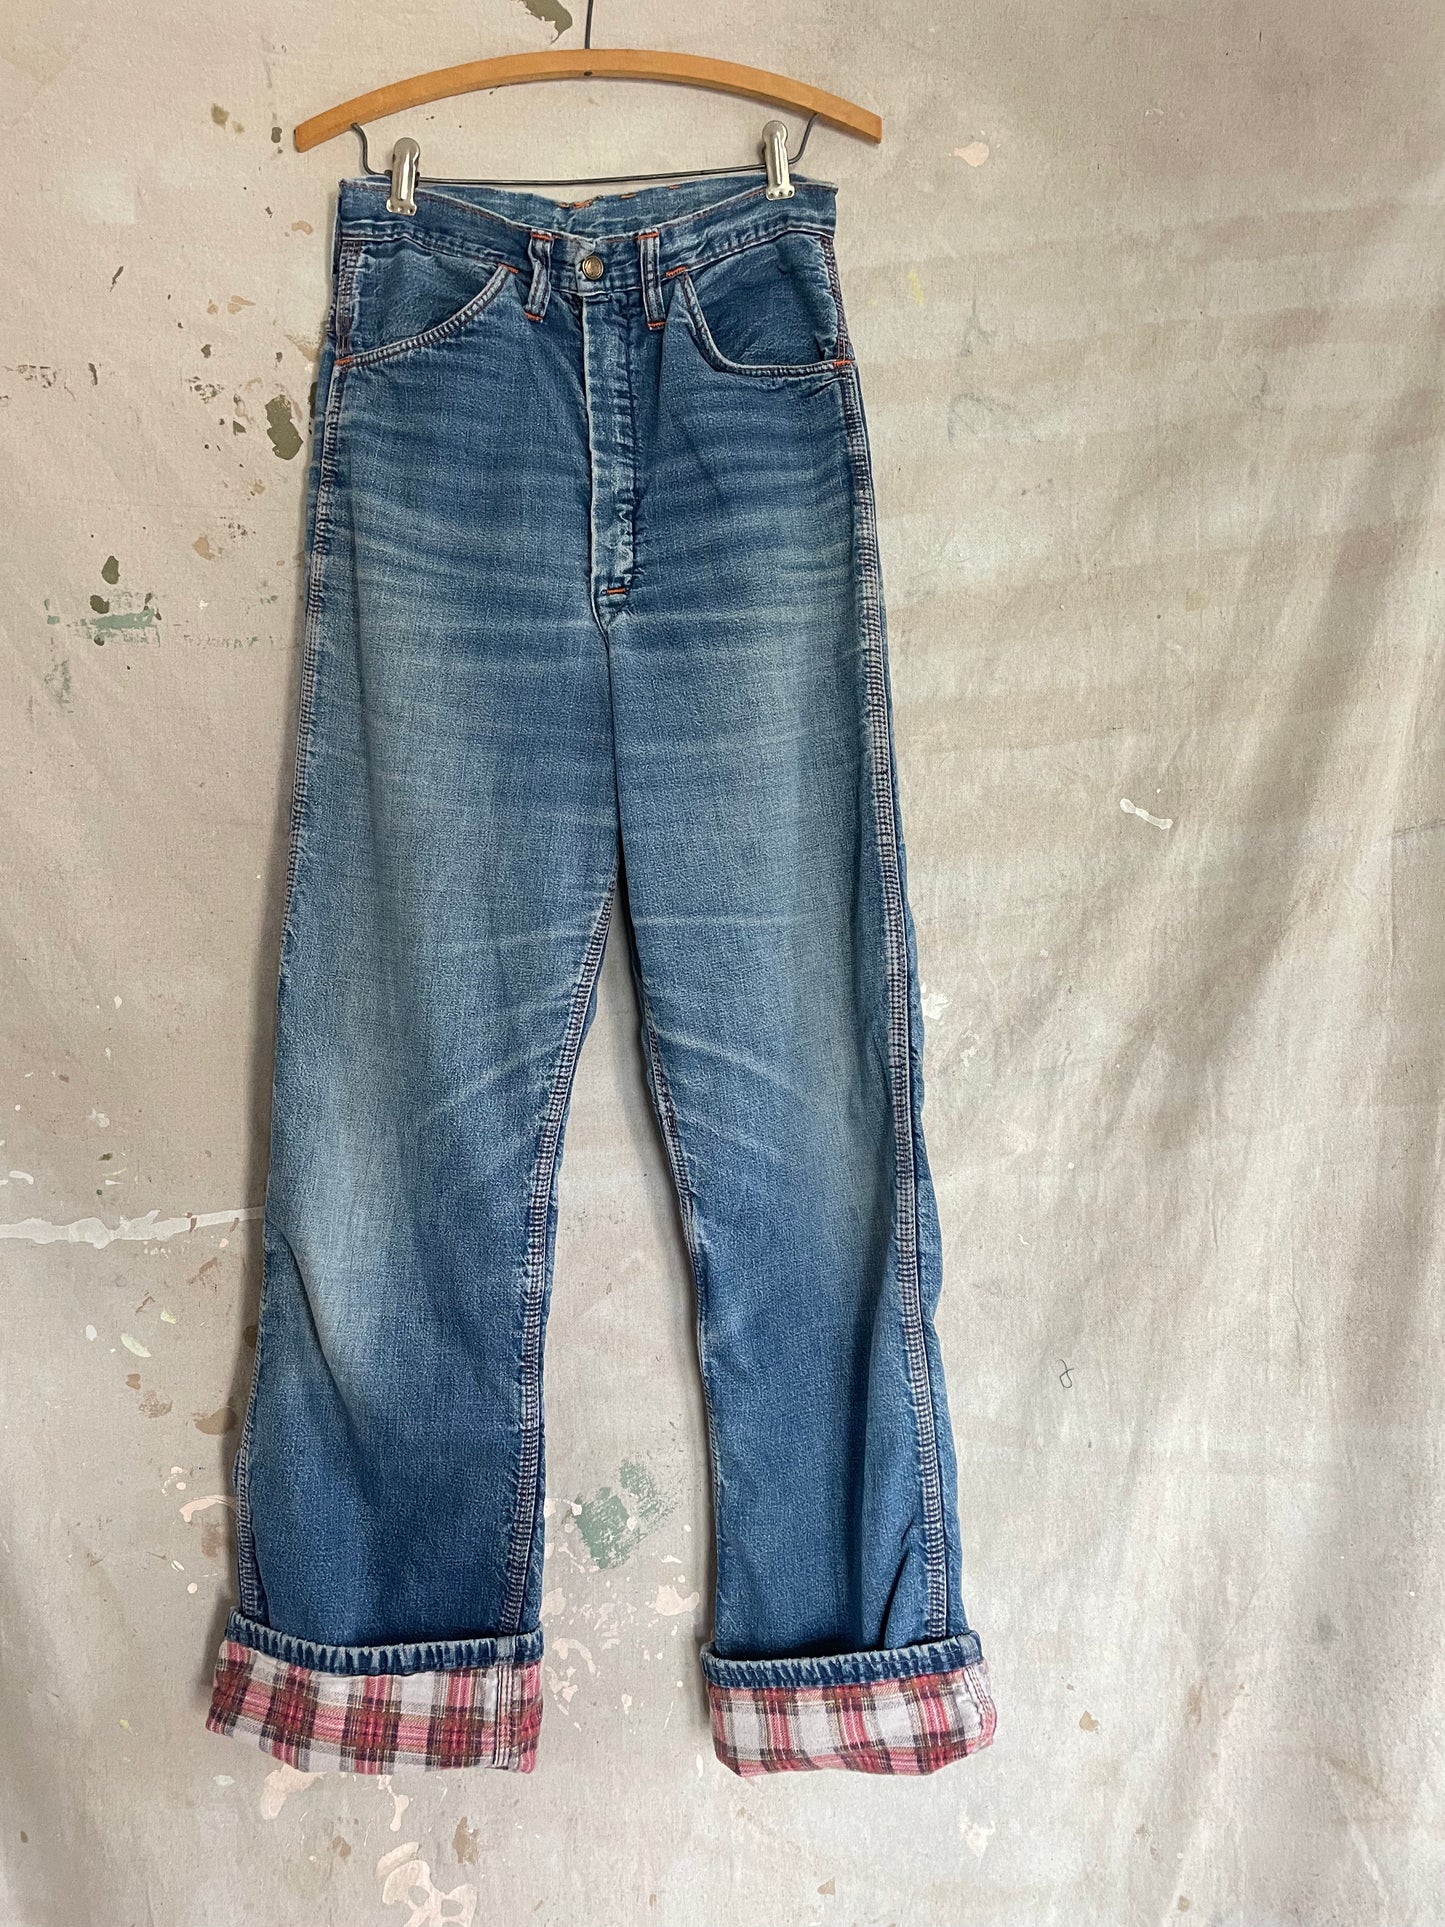 60s Flannel Lined Jeans